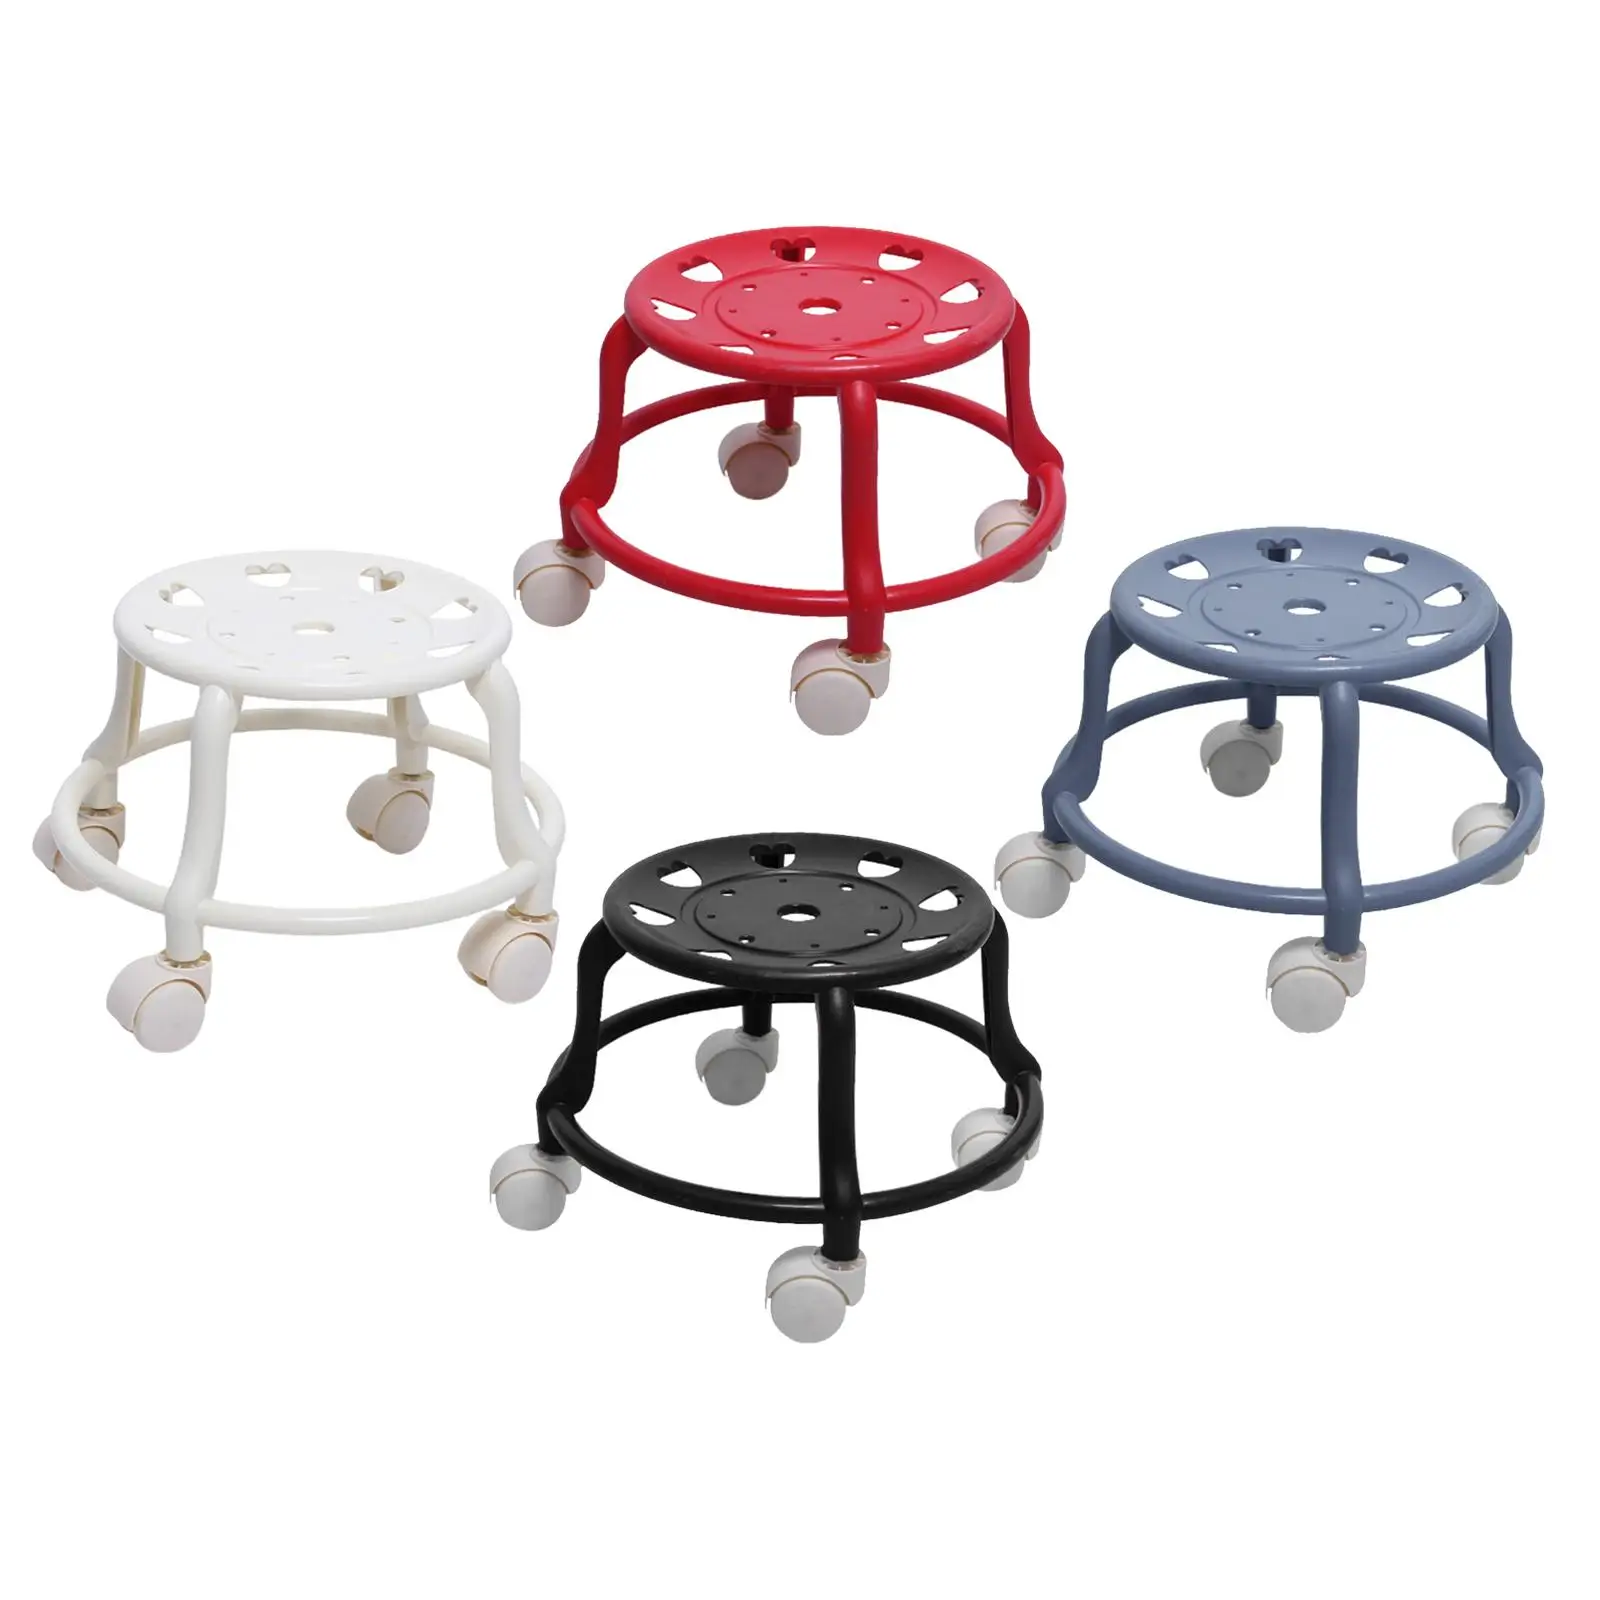 Low Roller Stool Heavy Loading Comfortable Planter Stand Universal Swivel Casters Pulley Stools for Kids and Adults Fitness